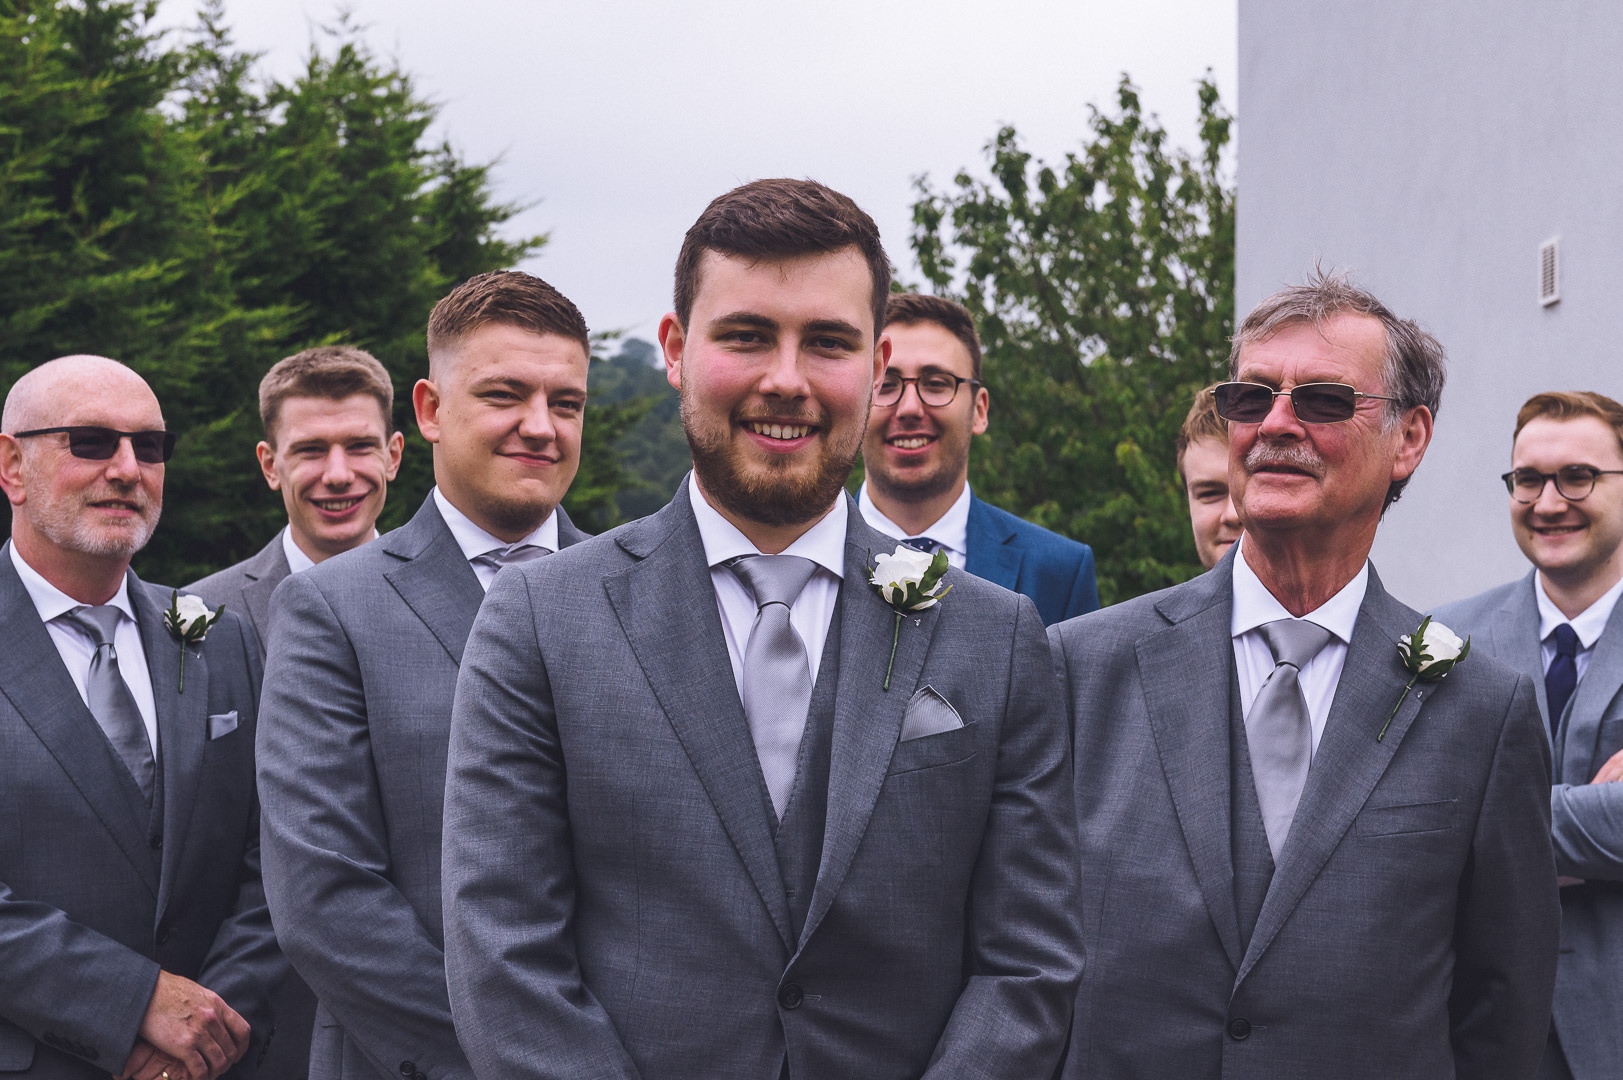 The groomsmen are lined up for the photo